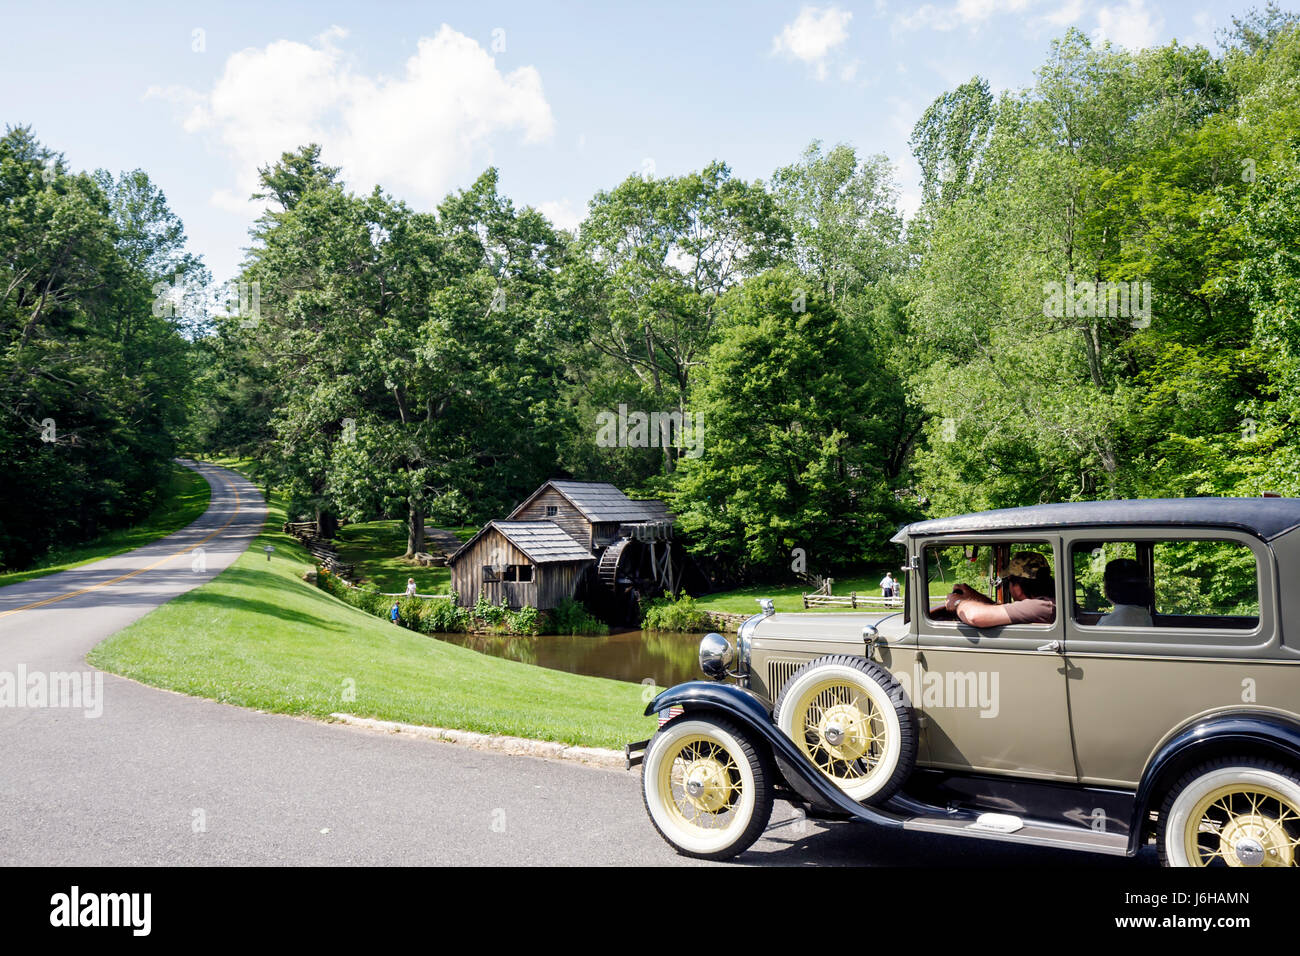 Blue Ridge Parkway Virginia,Appalachian Mountains,Mabry Mill,Historic Grismill,milepost 176,Watermill,antique car,Model A Ford,VA090621064 Banque D'Images